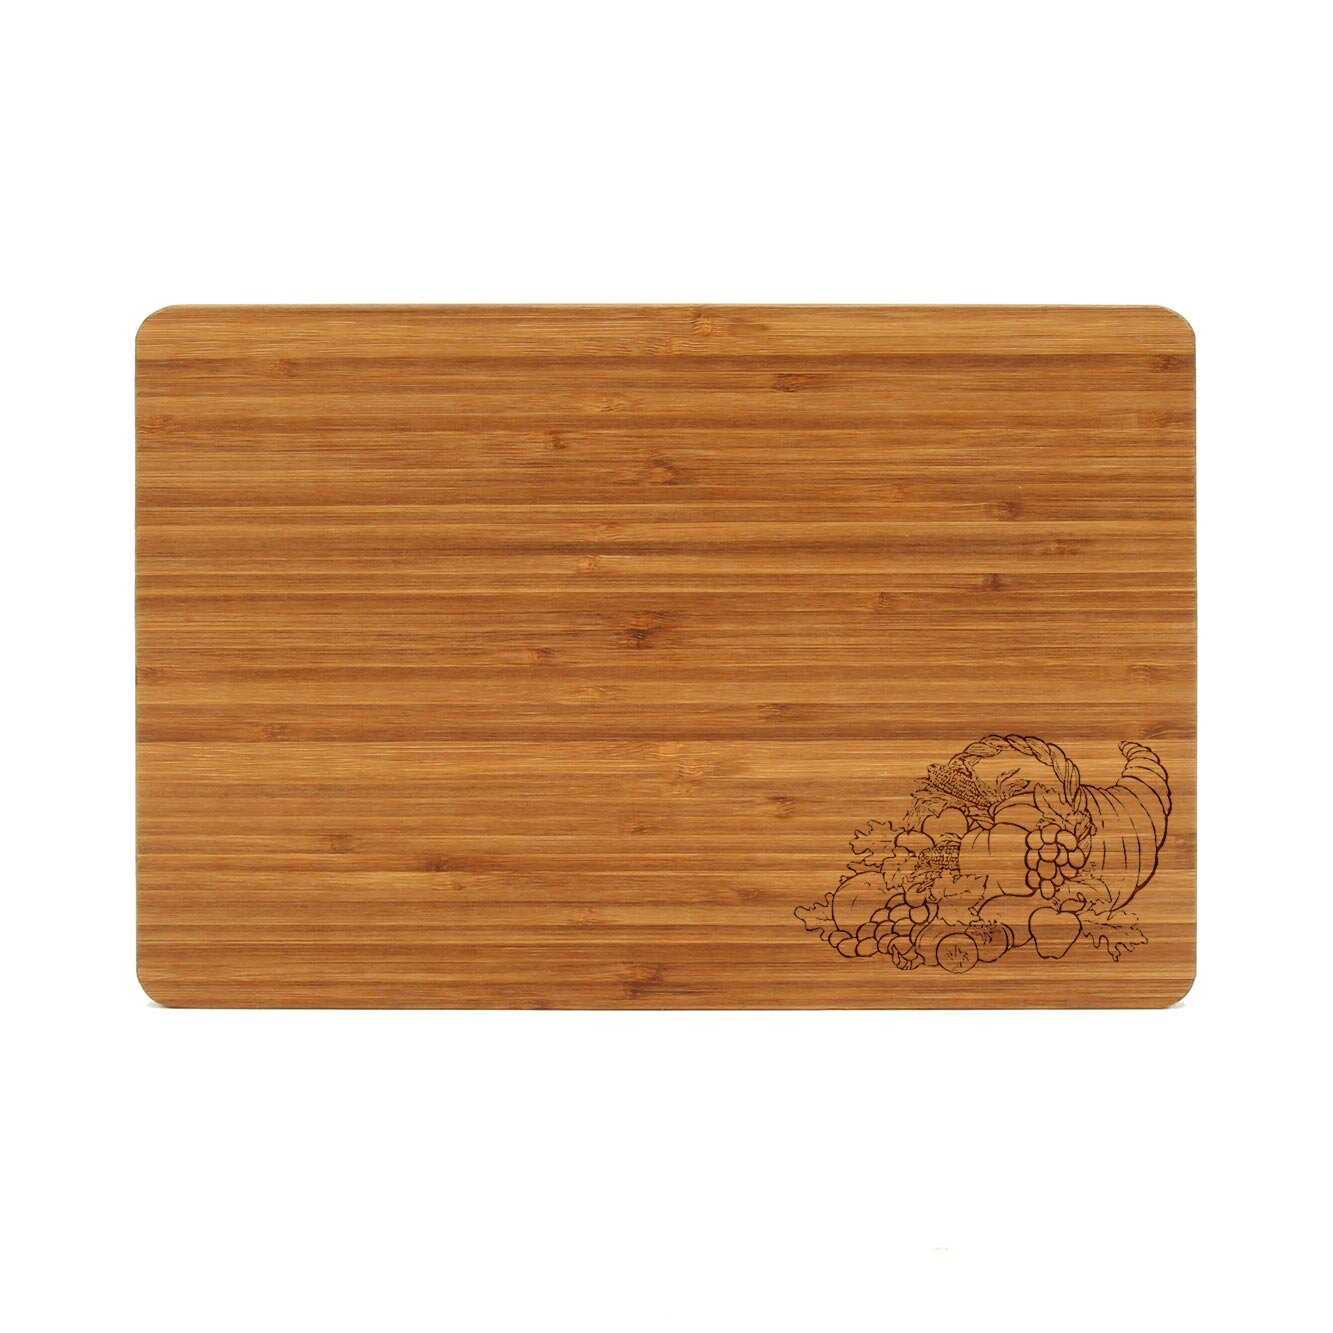  Prosumer's Choice Premium Bamboo Large Cutting Boards